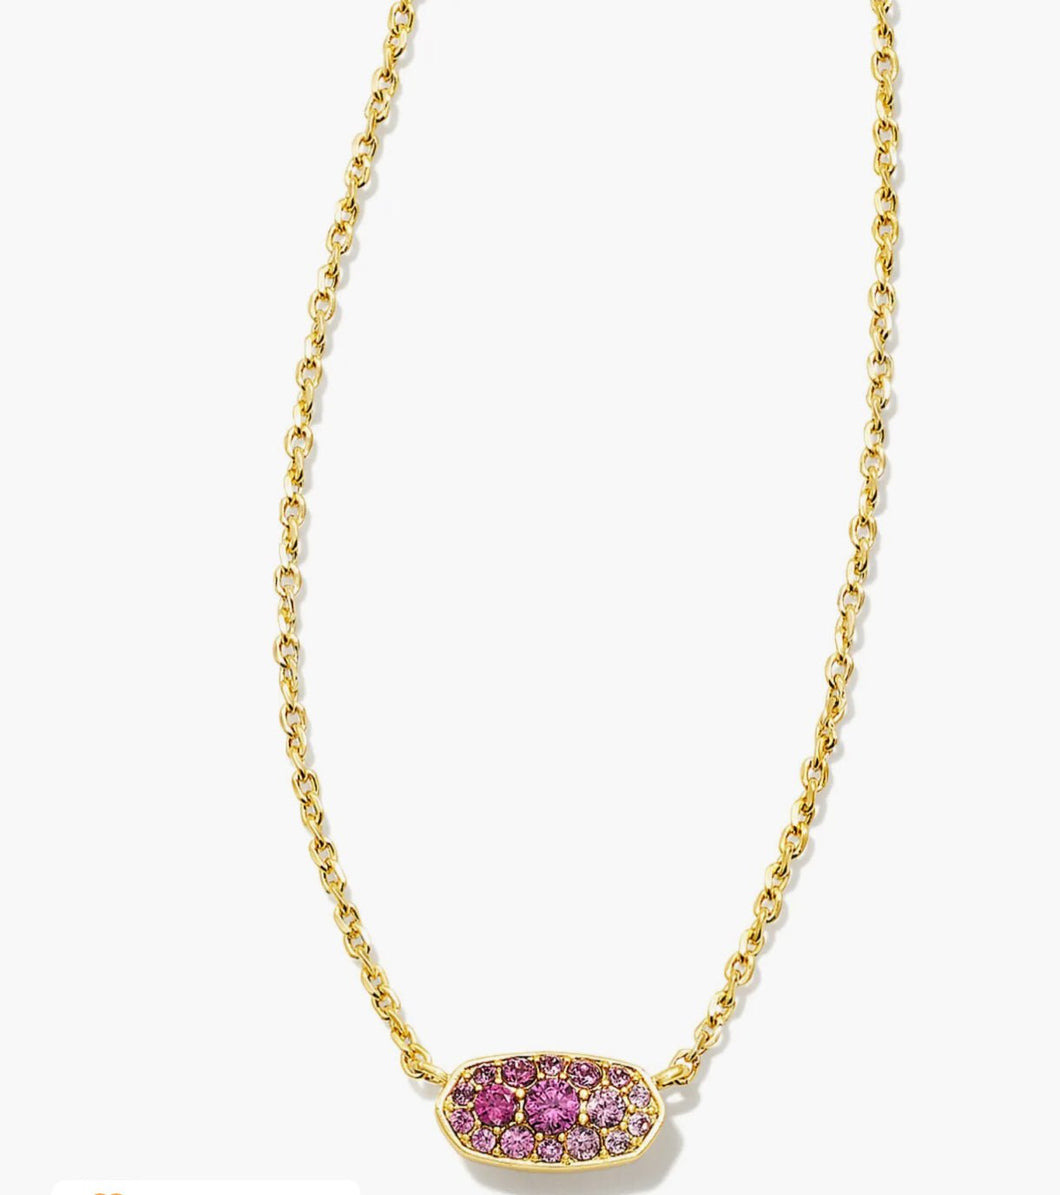 KENDRA SCOTT Grayson Gold Crystal Pendant Necklace in Pink Ombre
9608853164